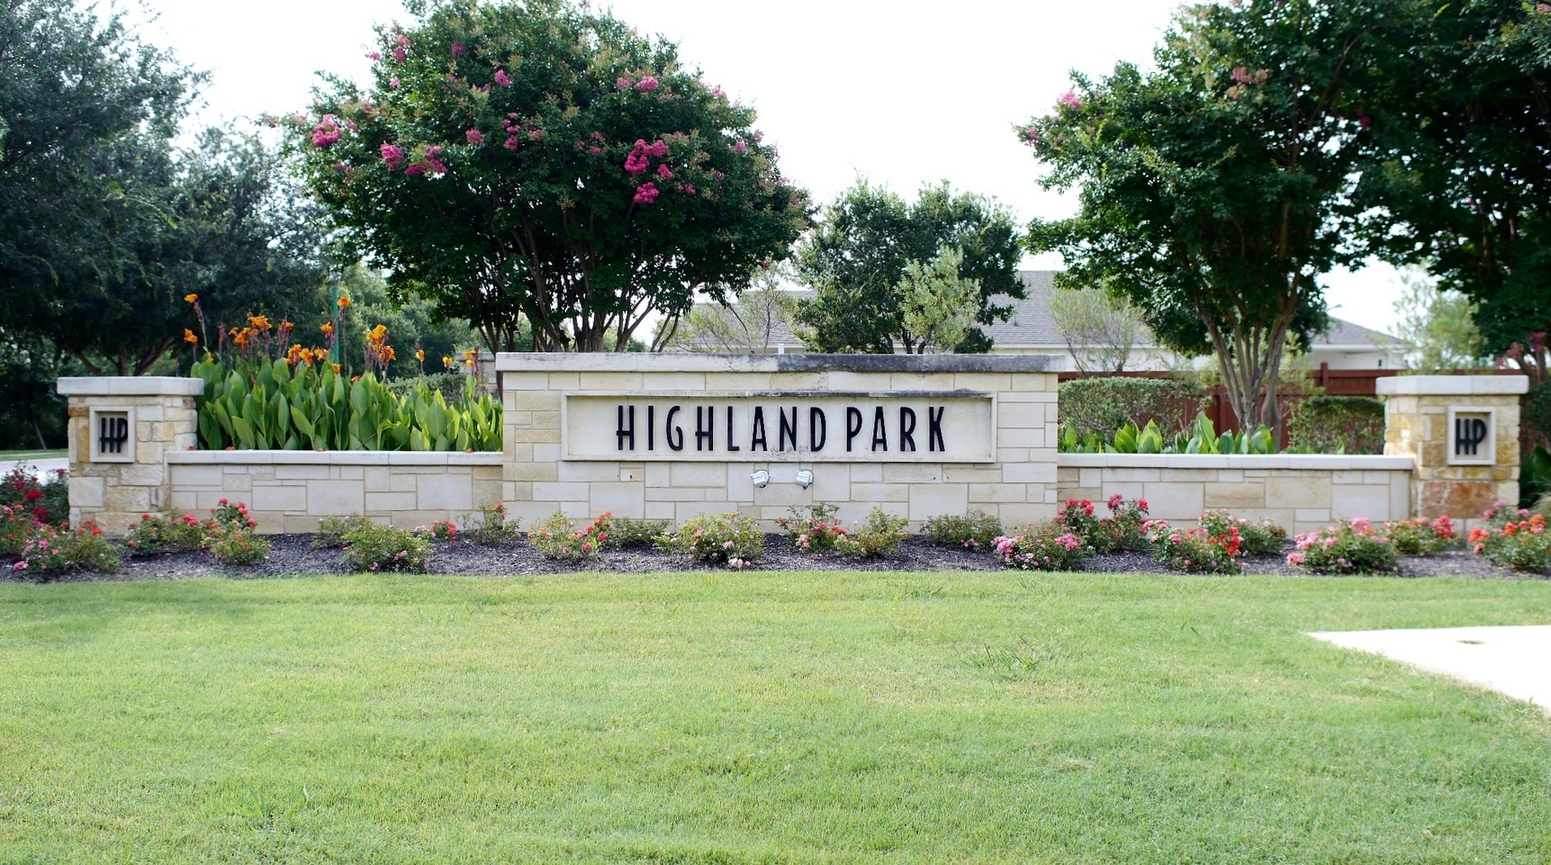 Highland Park Homes for Sale in Pflugerville TX - TCP Real Estate1551 x 865